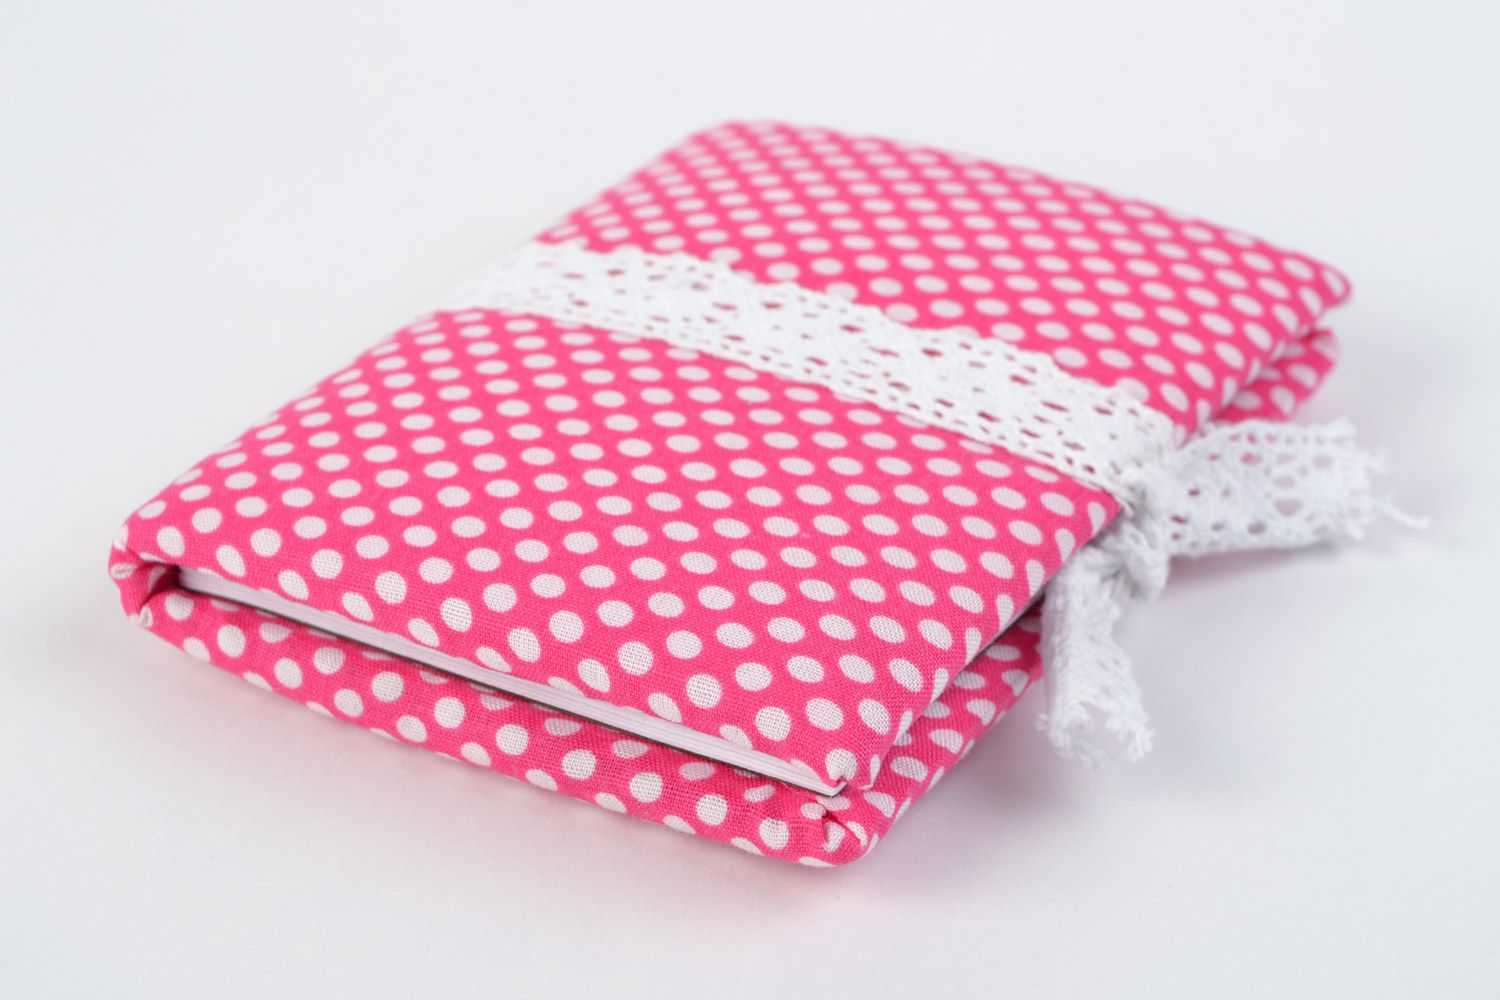 Handmade notebook with bright pink and white polka dot fabric cover for 60 pages photo 4